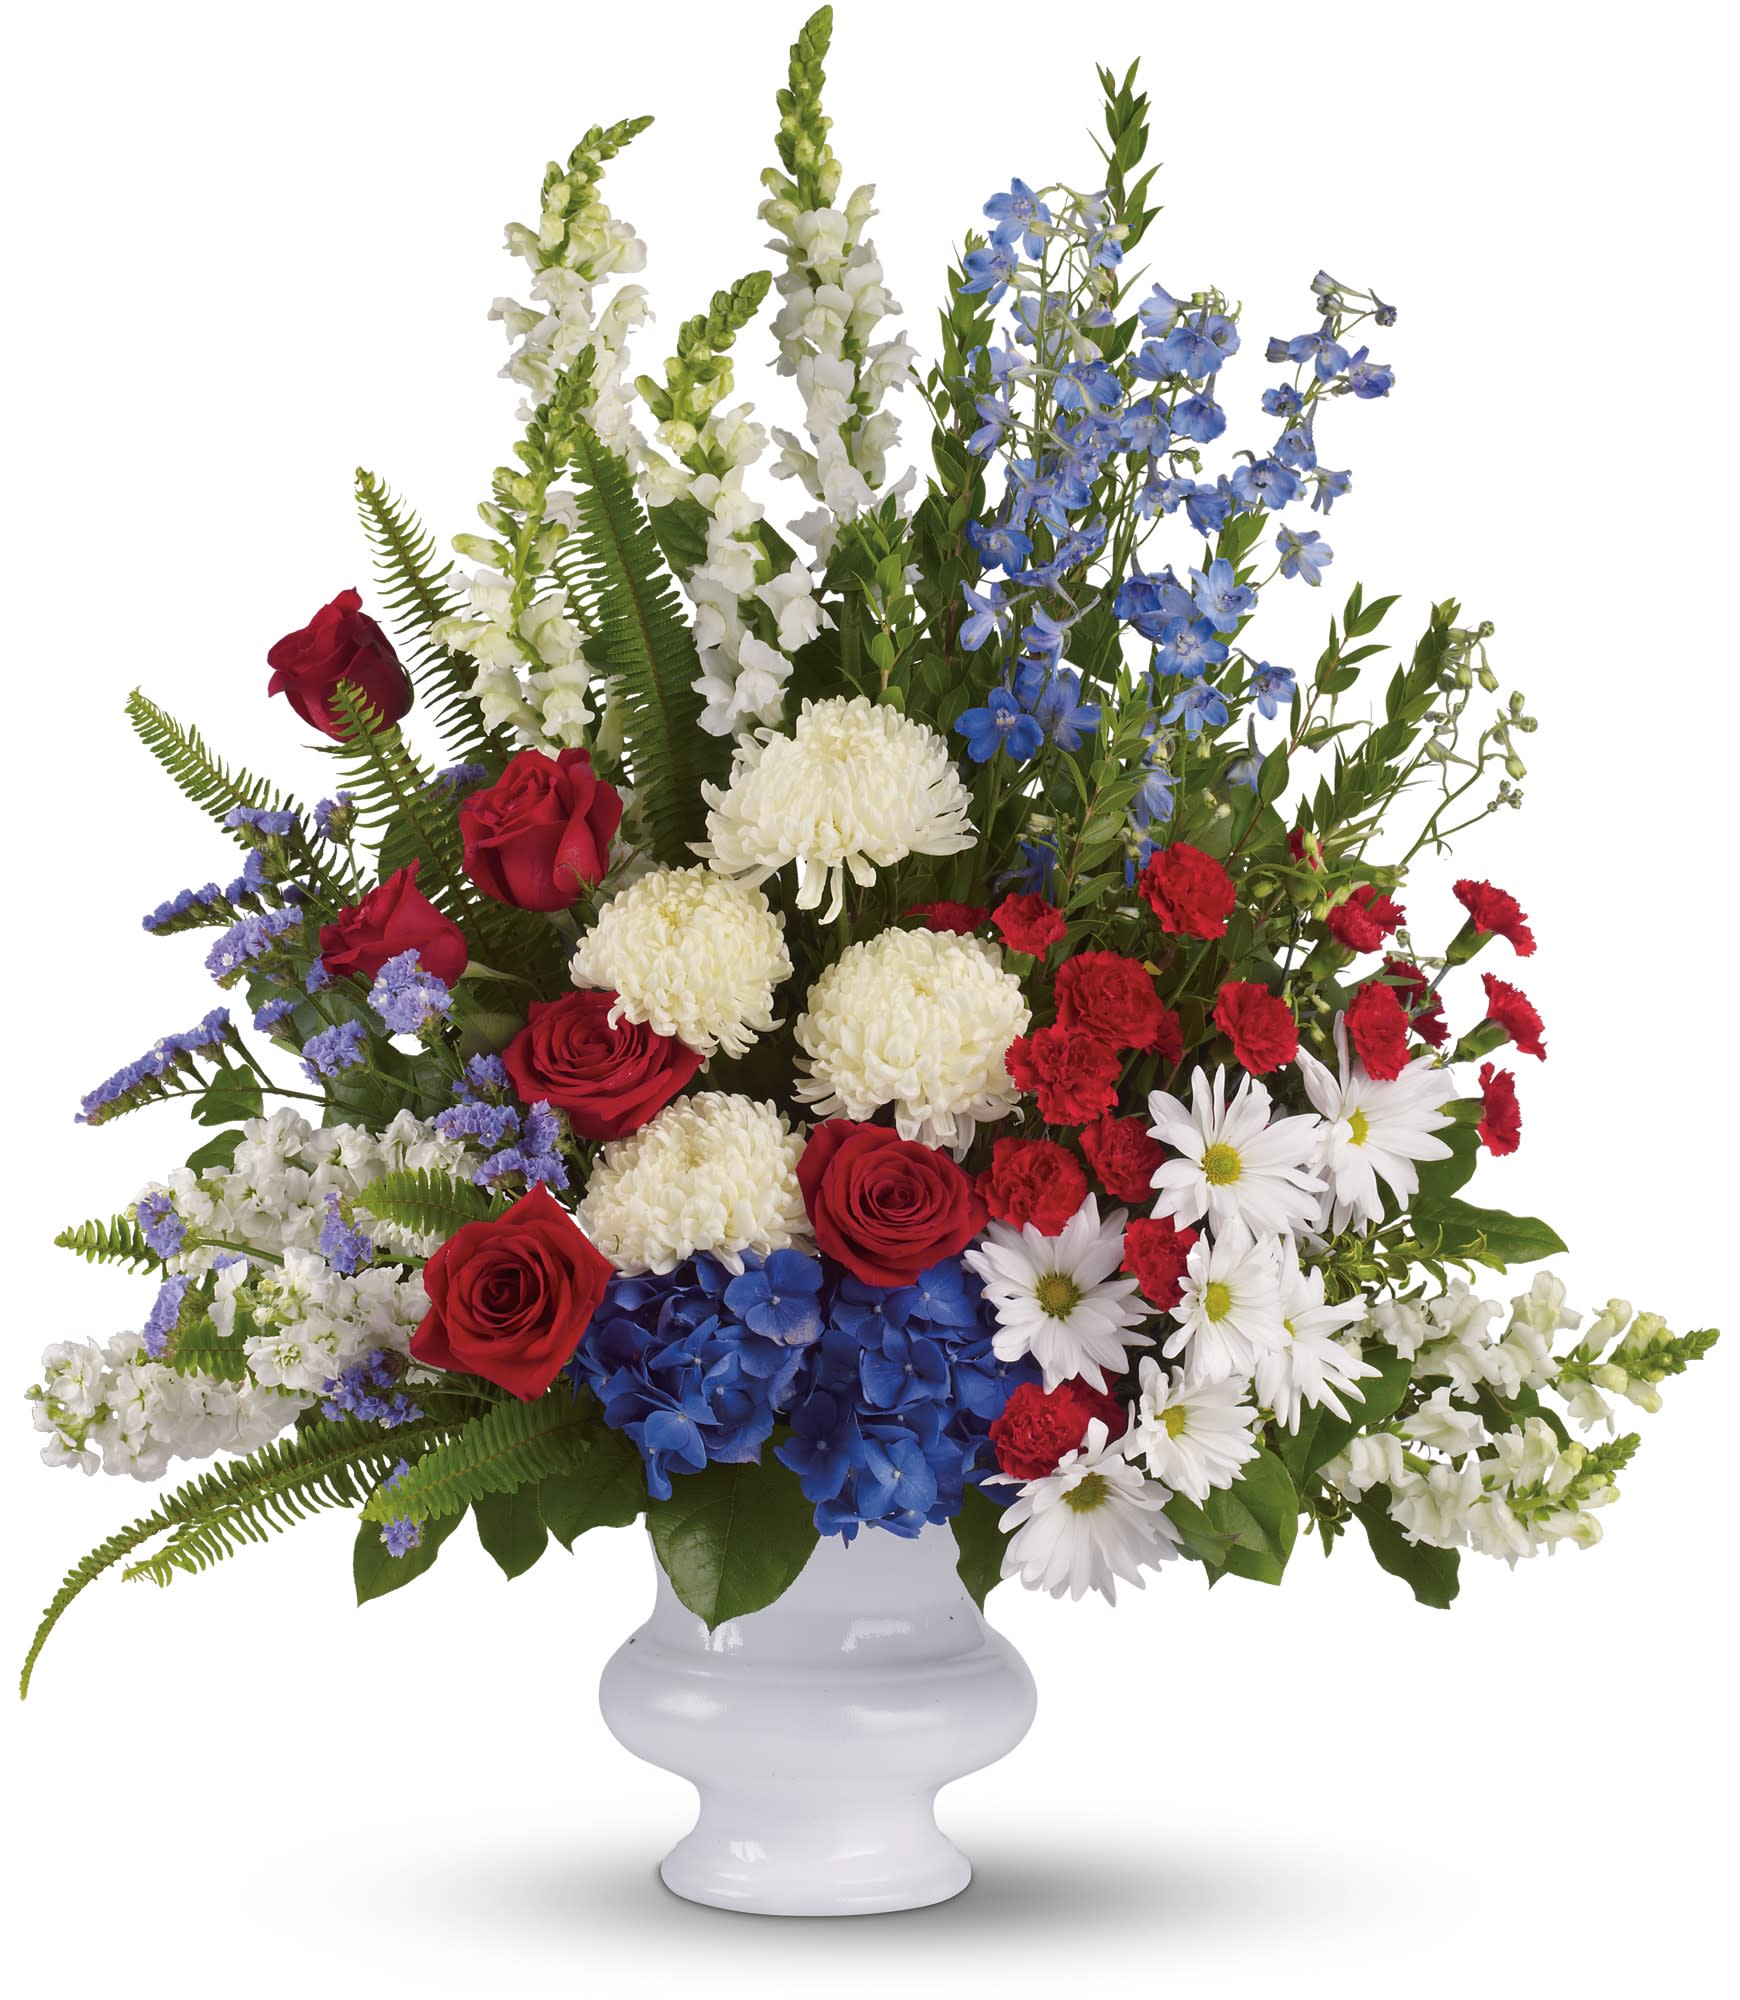 With Distinction by Teleflora - A dazzling display of patriotic red, white and blue flowers sends a silent yet poignant statement about hope, freedom and the strength to endure. This proud bouquet is a testament to life that is sure to be appreciated.  